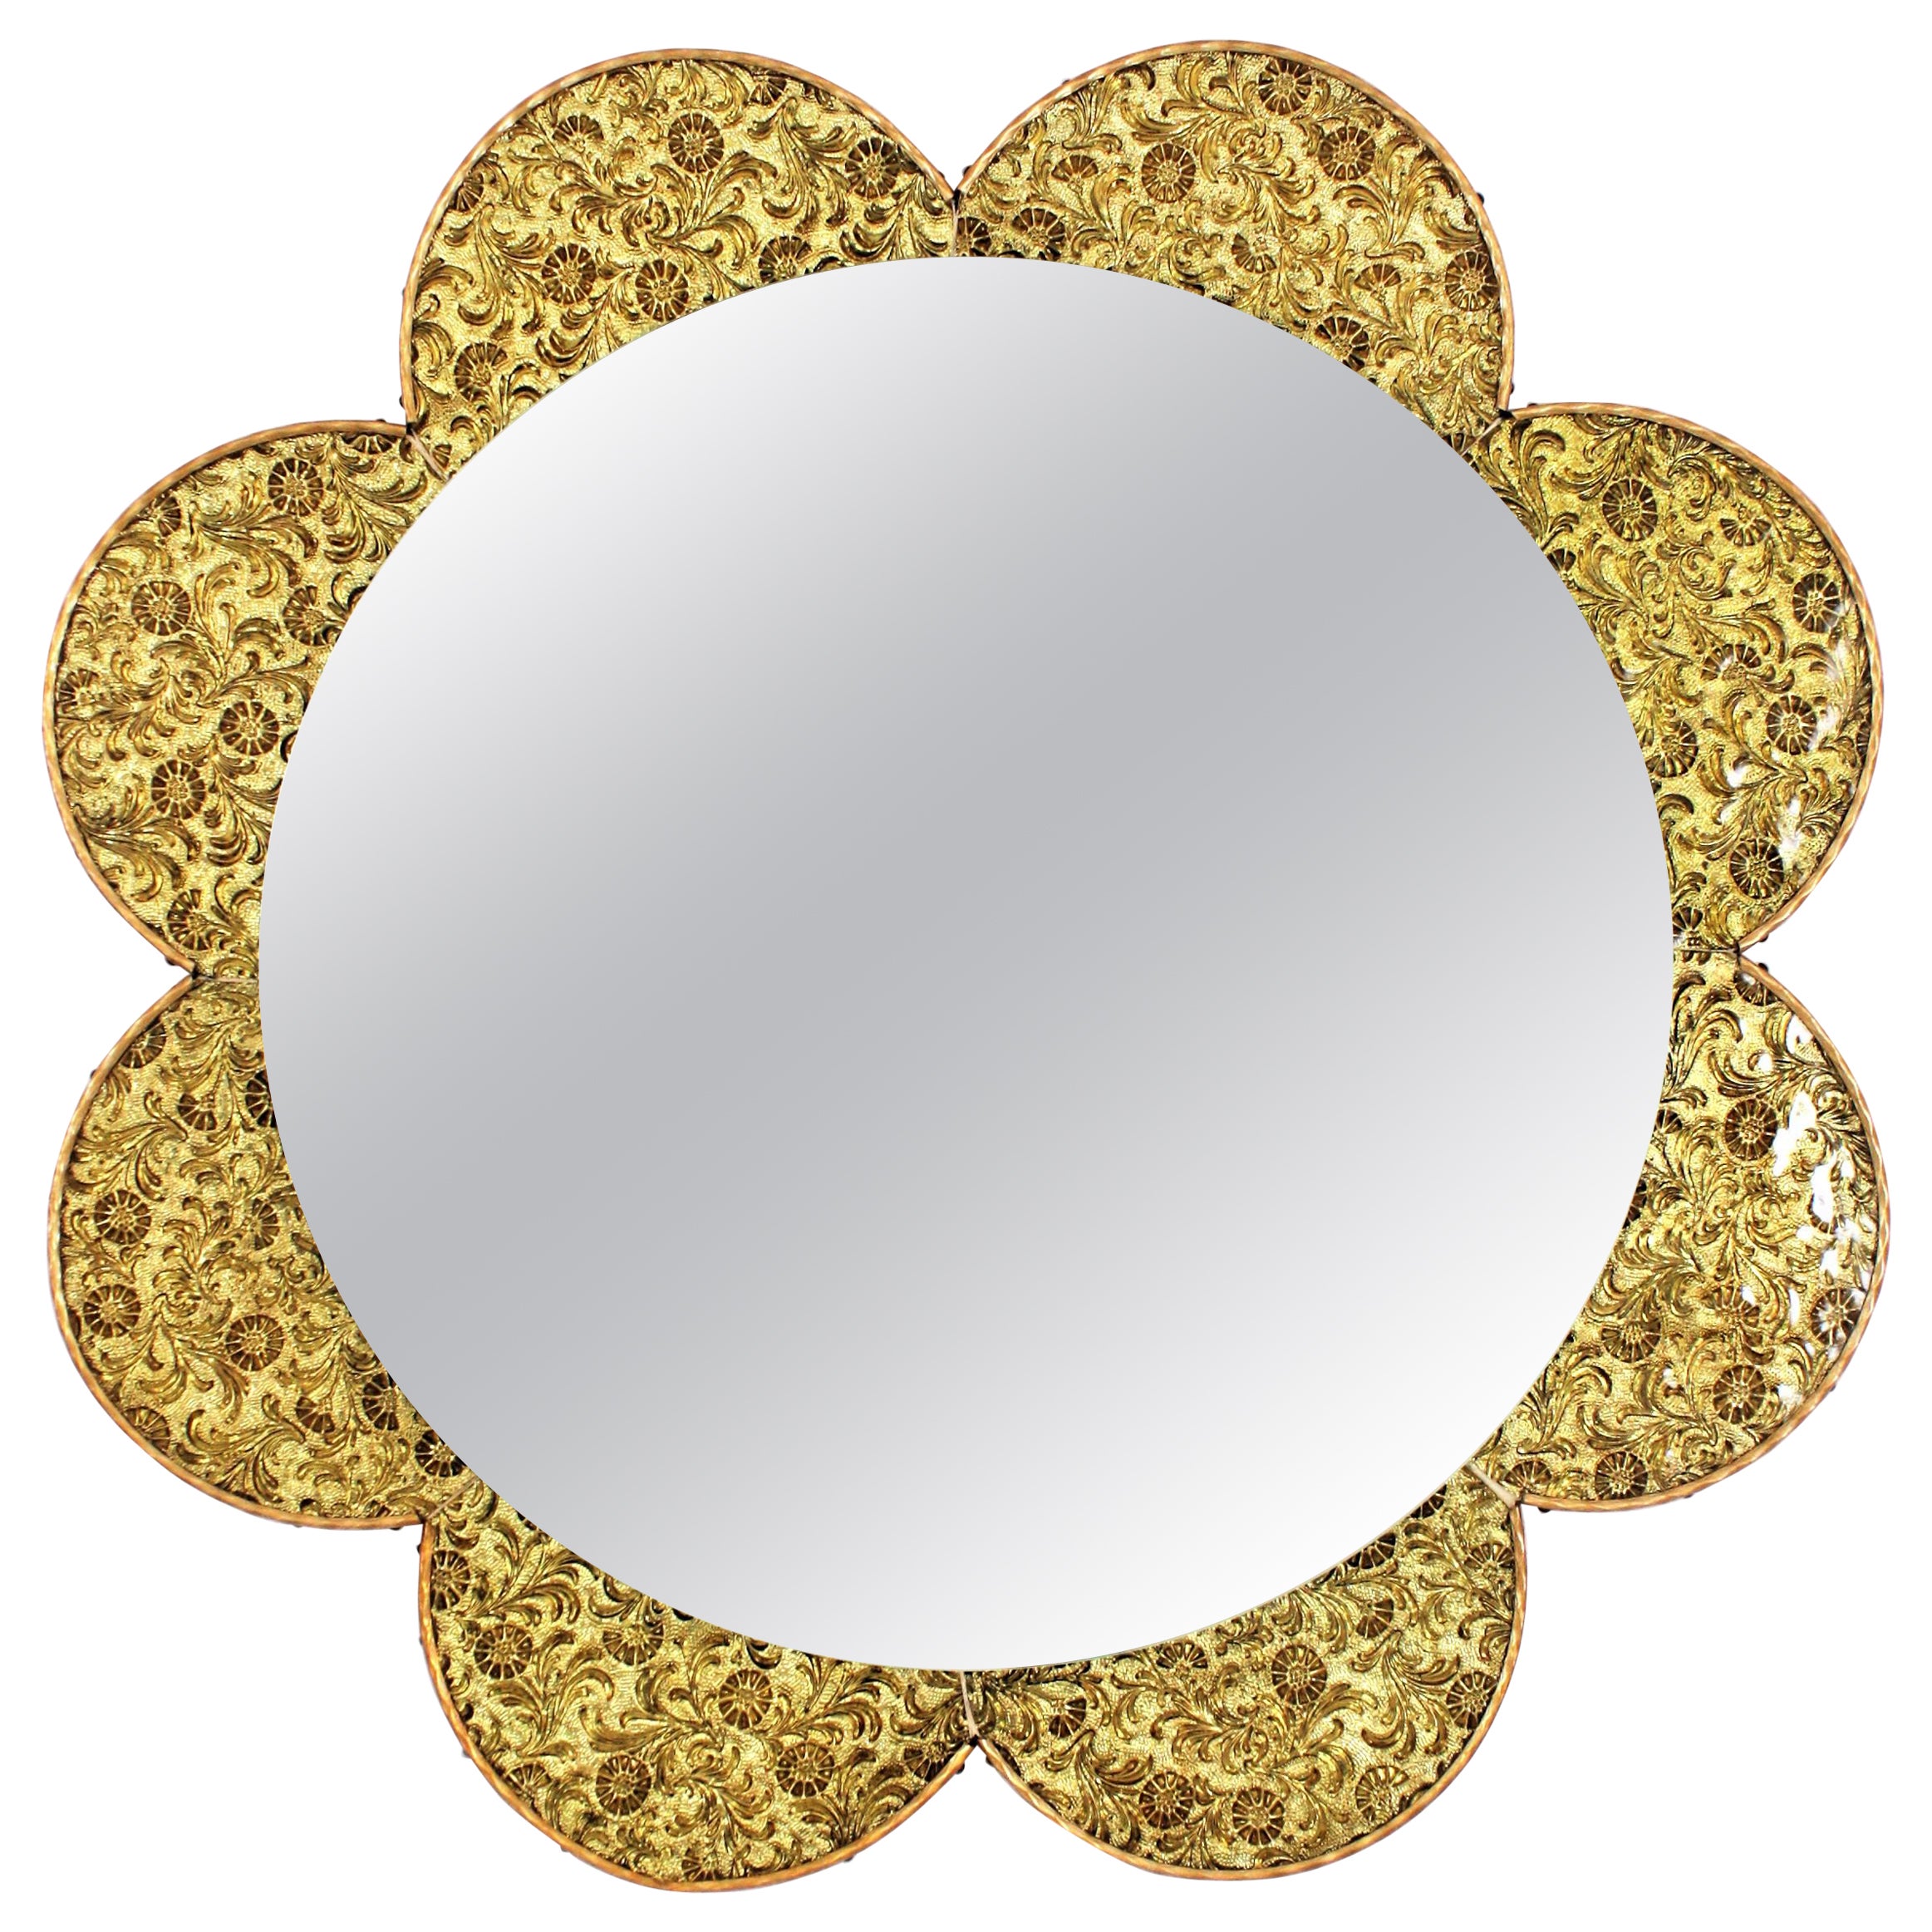 Flower Shaped Mirror with Golden Glass Petals